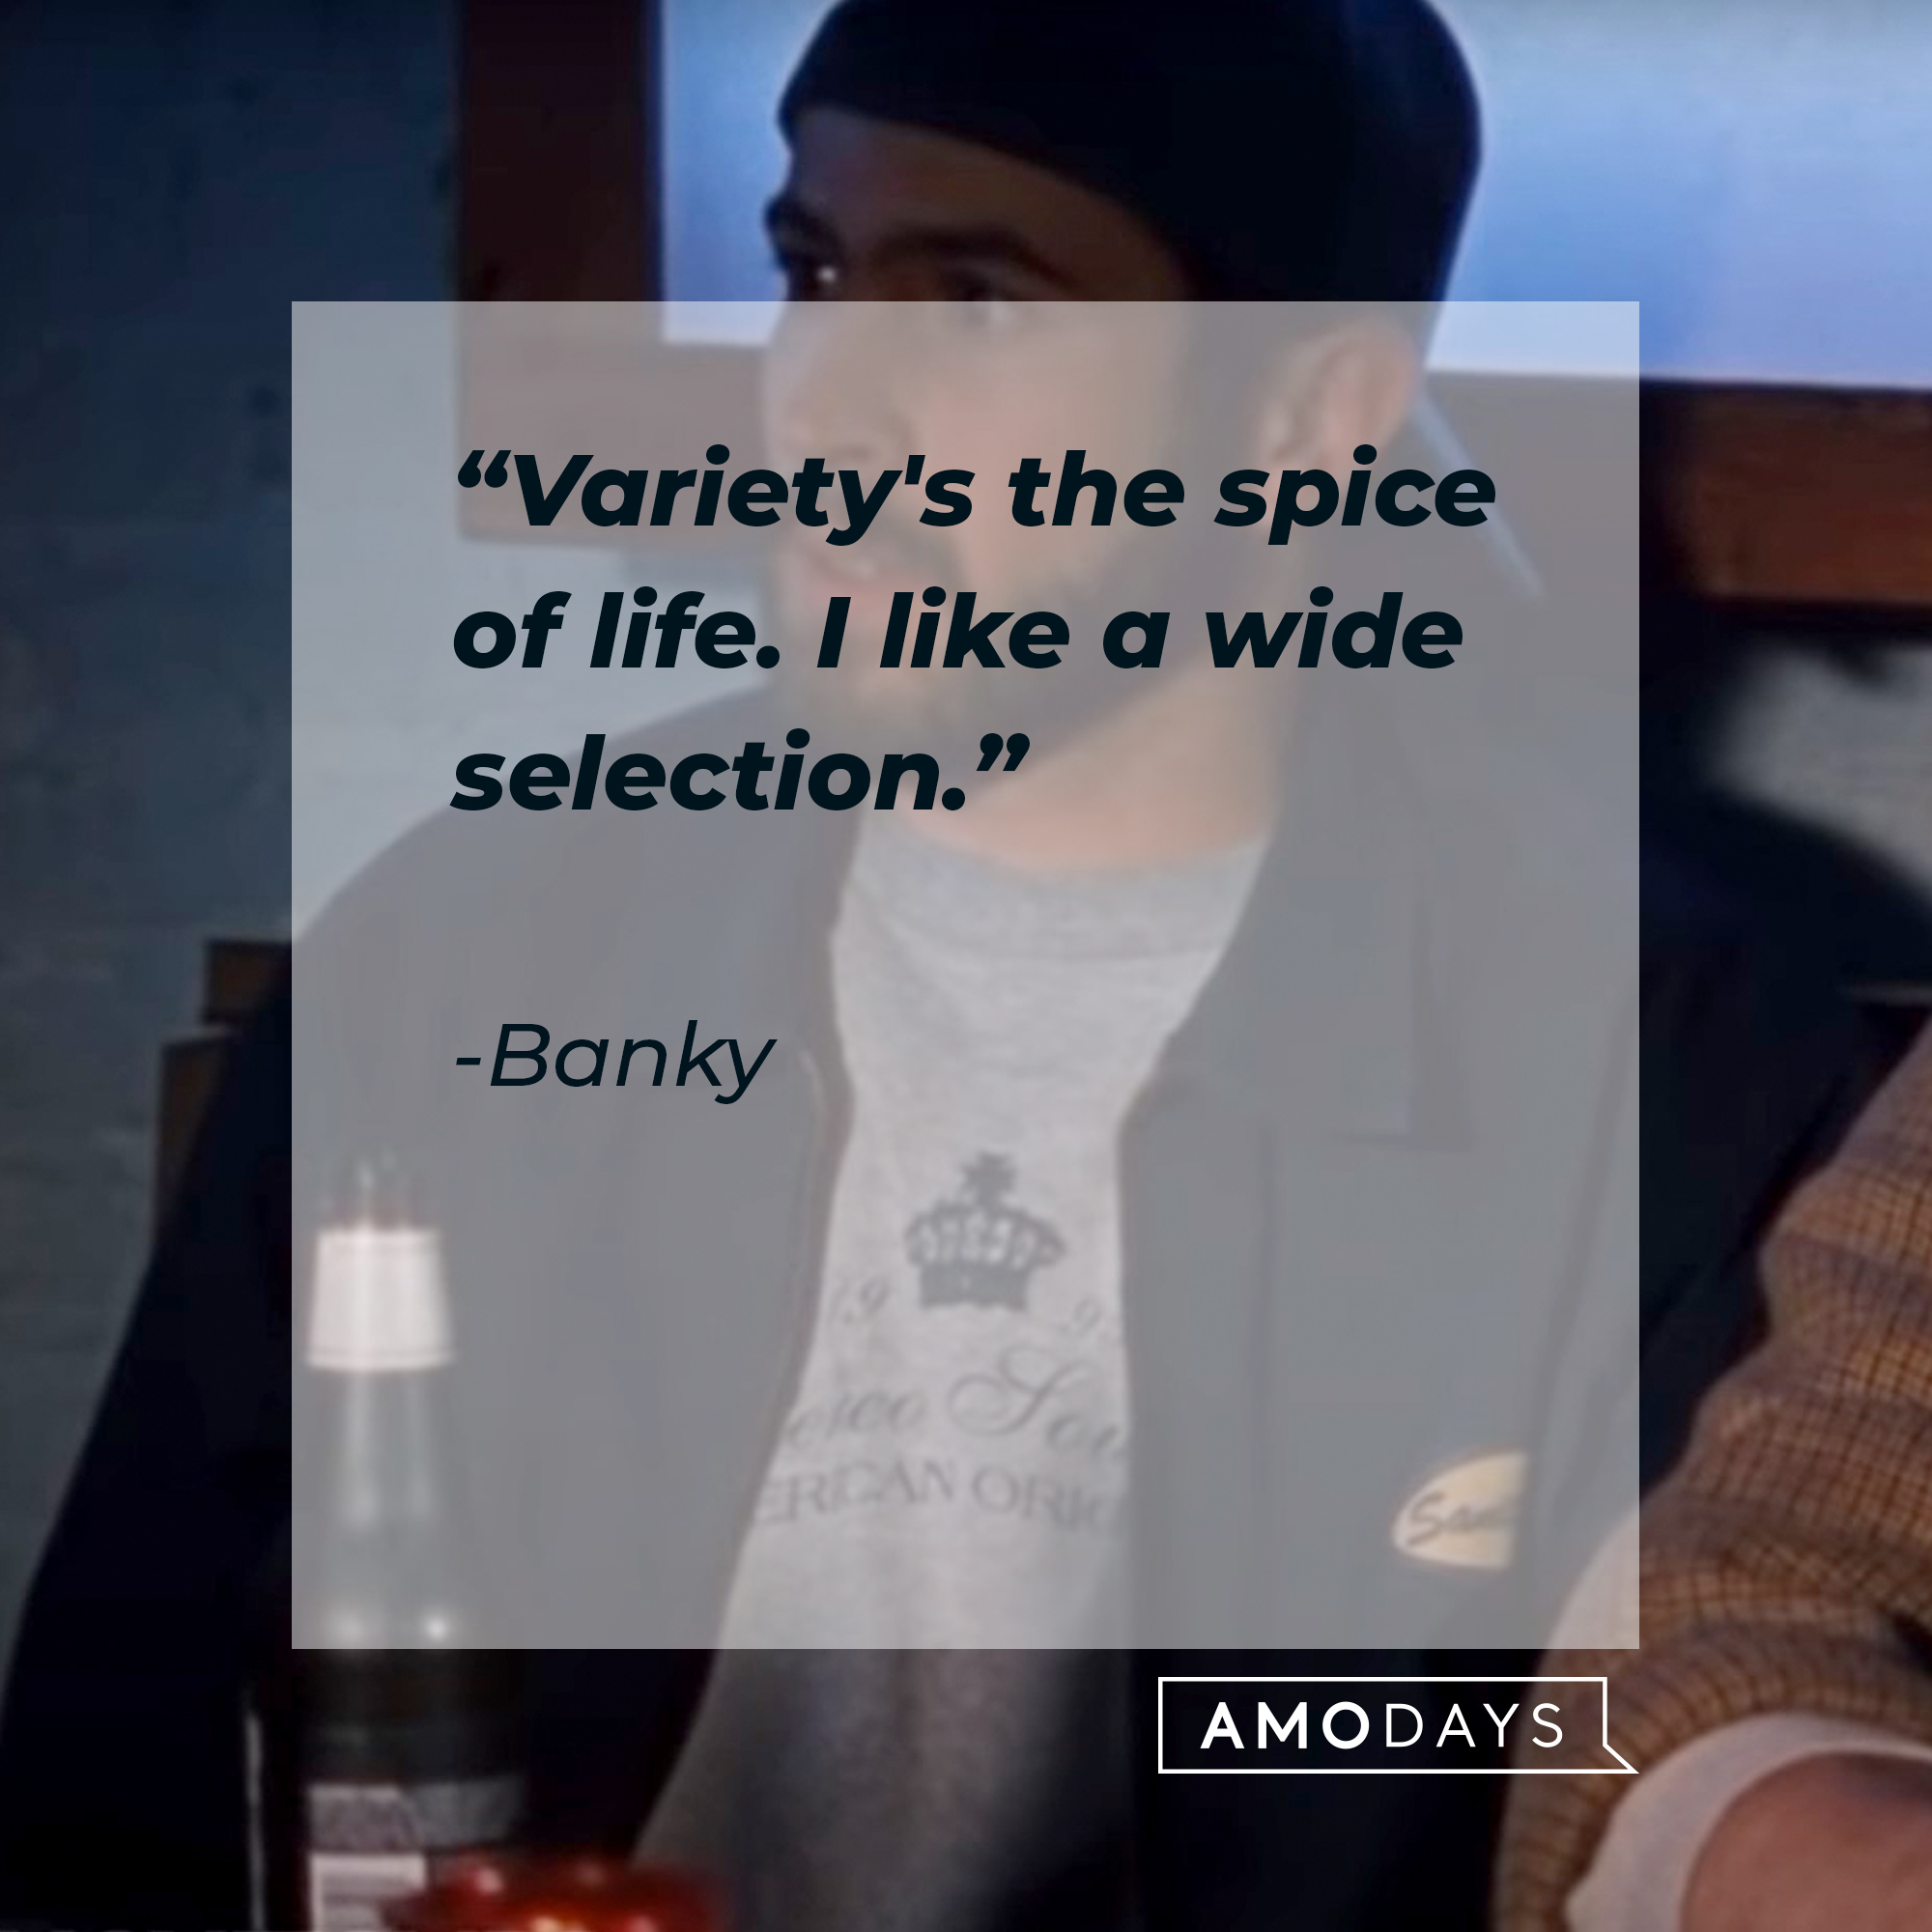 Banky, with his quote:  “Variety's the spice of life. I like a wide selection.” | Source: facebook.com/ChasingAmyMovie